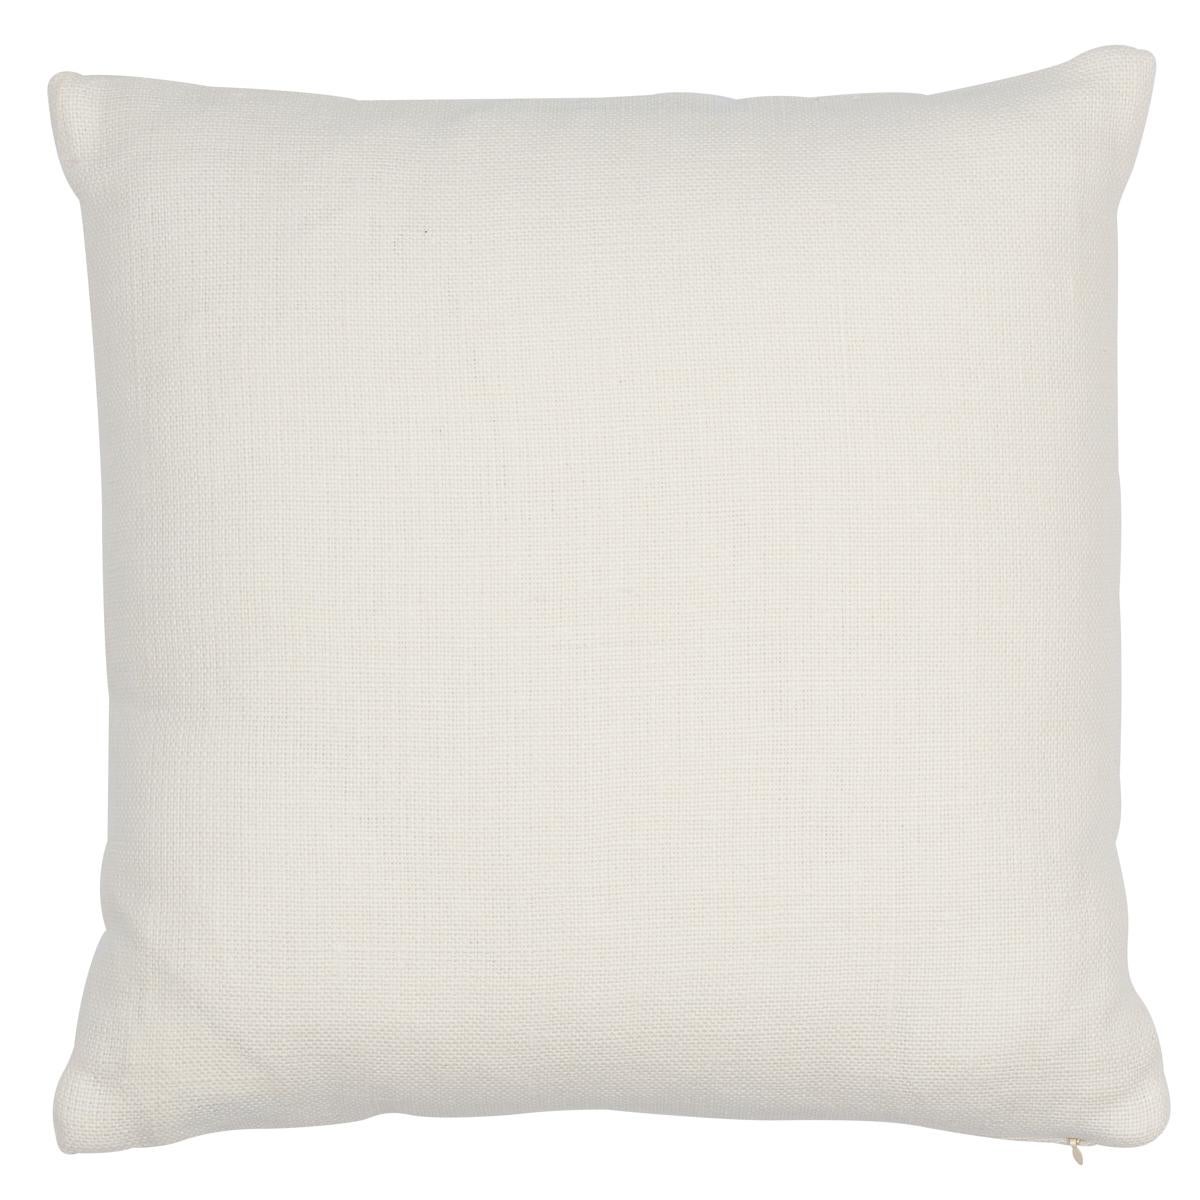 This pillow features Ashoka Tape with a knife edge finish. With a winding, embroidered floral design accentuated with French Knots, Ashoka Tape adds an element of handcrafted beauty. Body of pillow is Gweneth Linen. Pillow includes a feather/down